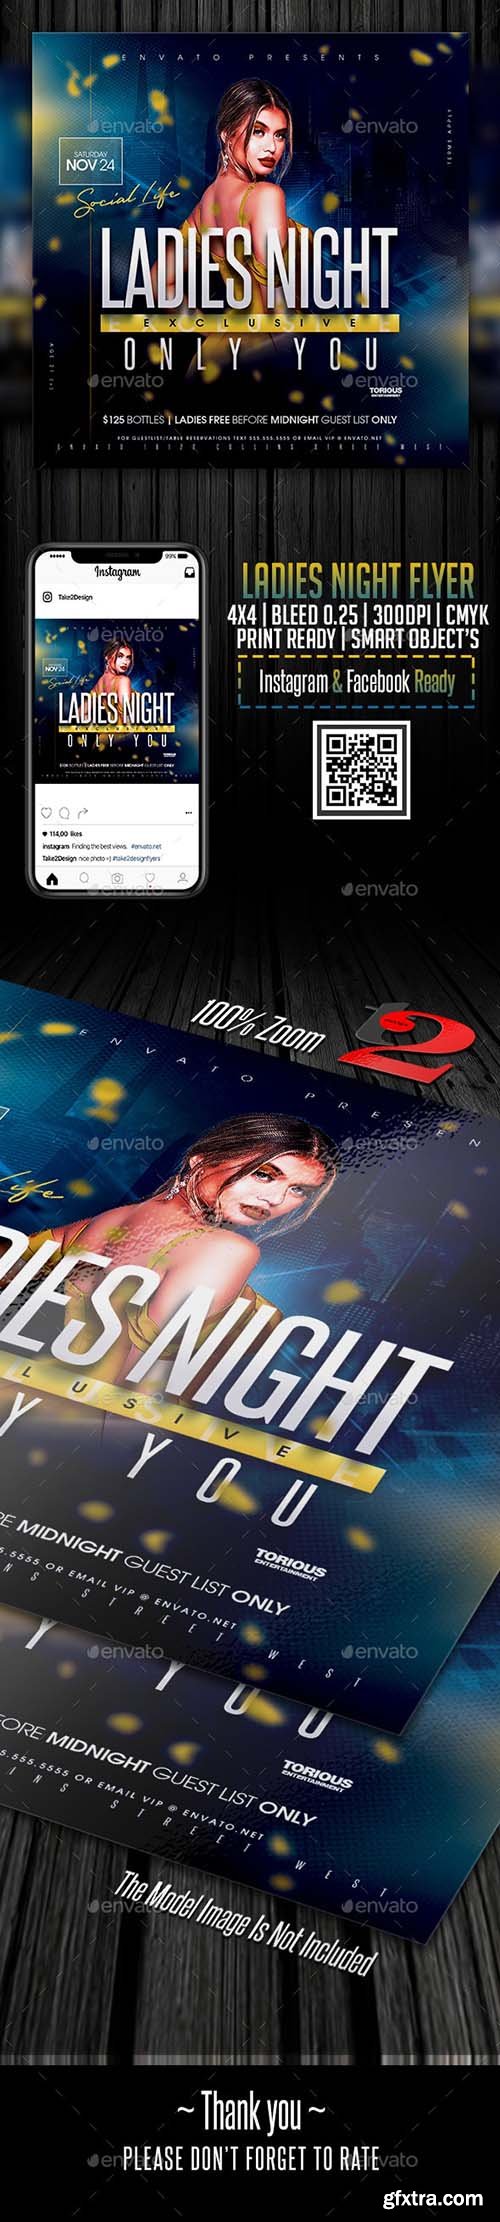 Graphicriver - Ladies Night Flyer Template 25843872